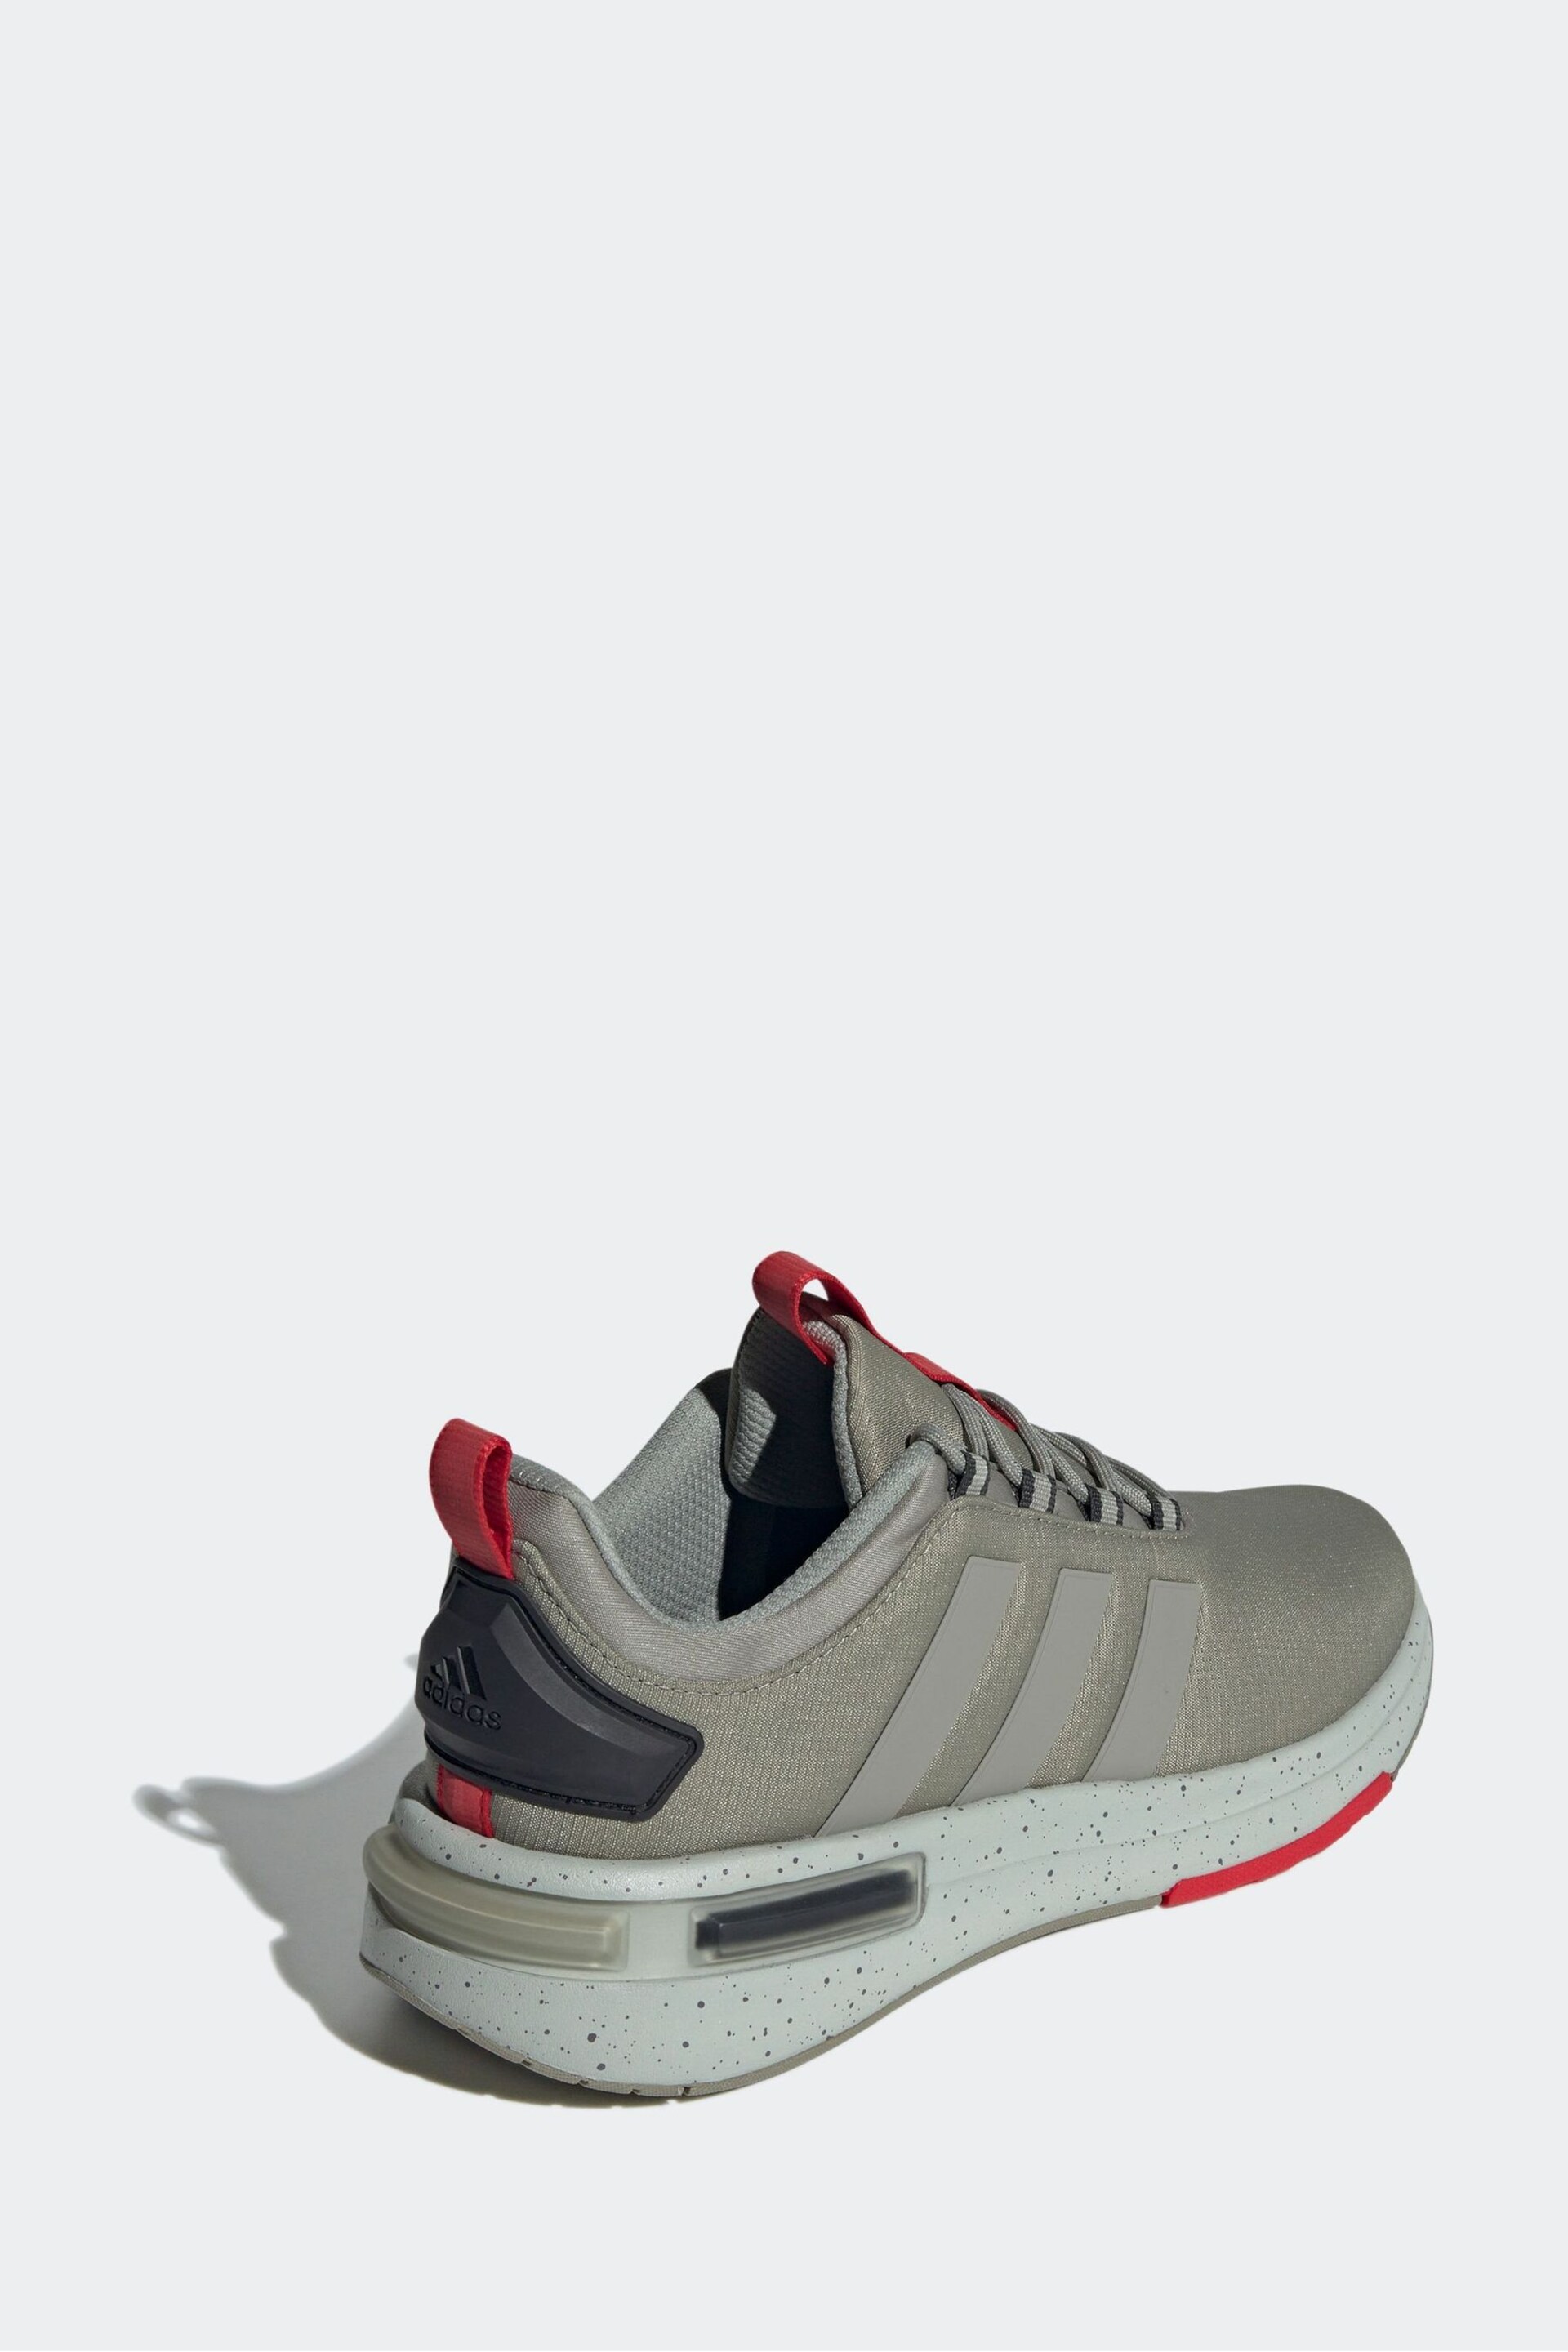 adidas Green Sportswear Racer TR23 Trainers - Image 2 of 8